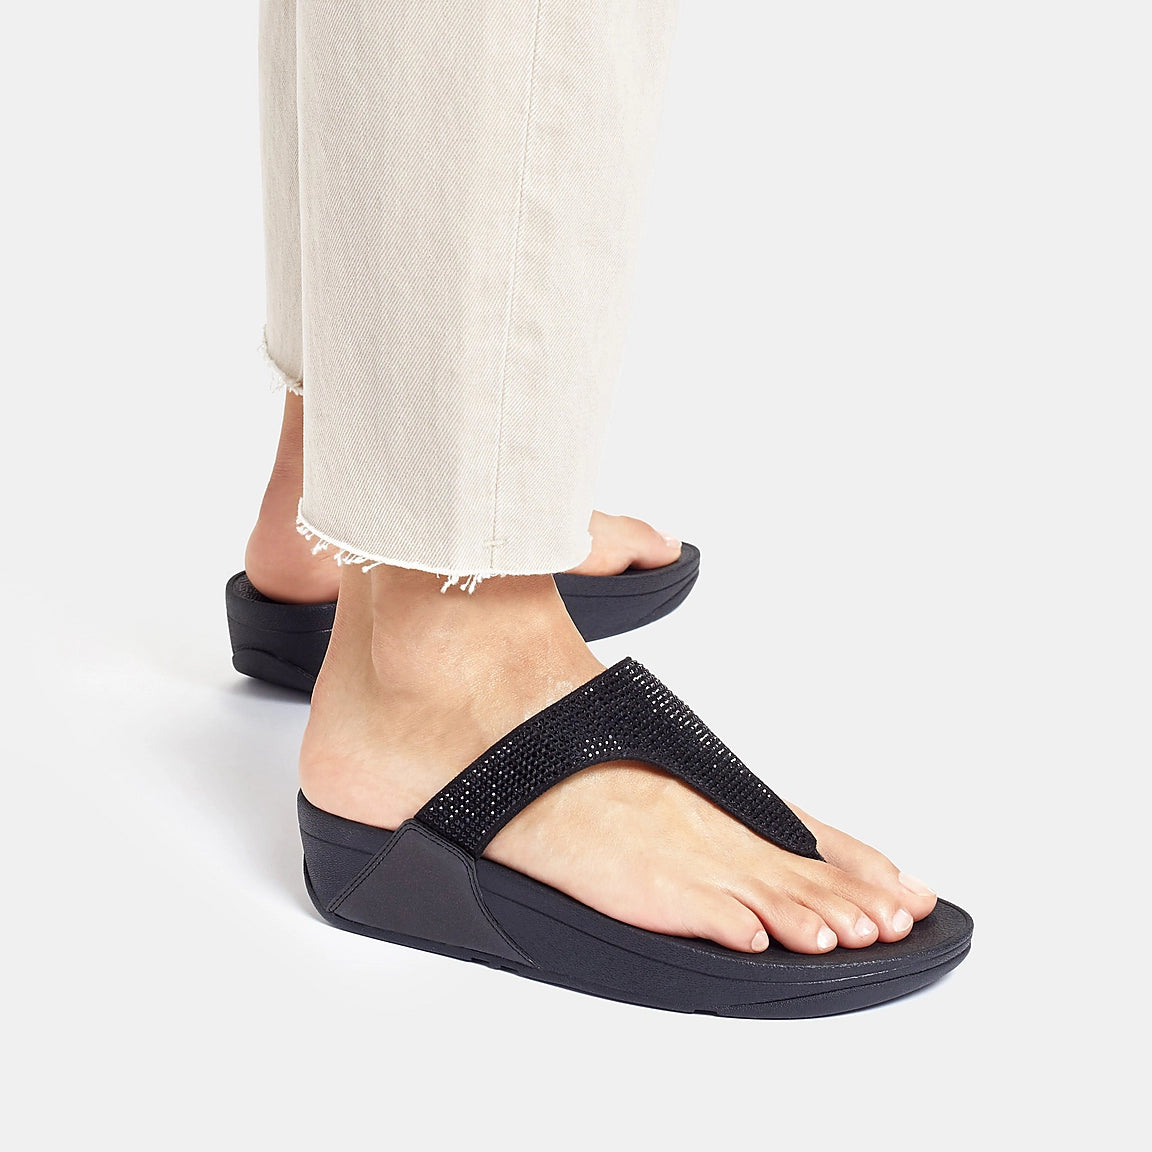 FITFLOP LULU SANDAL IN BLACK WITH GEMS